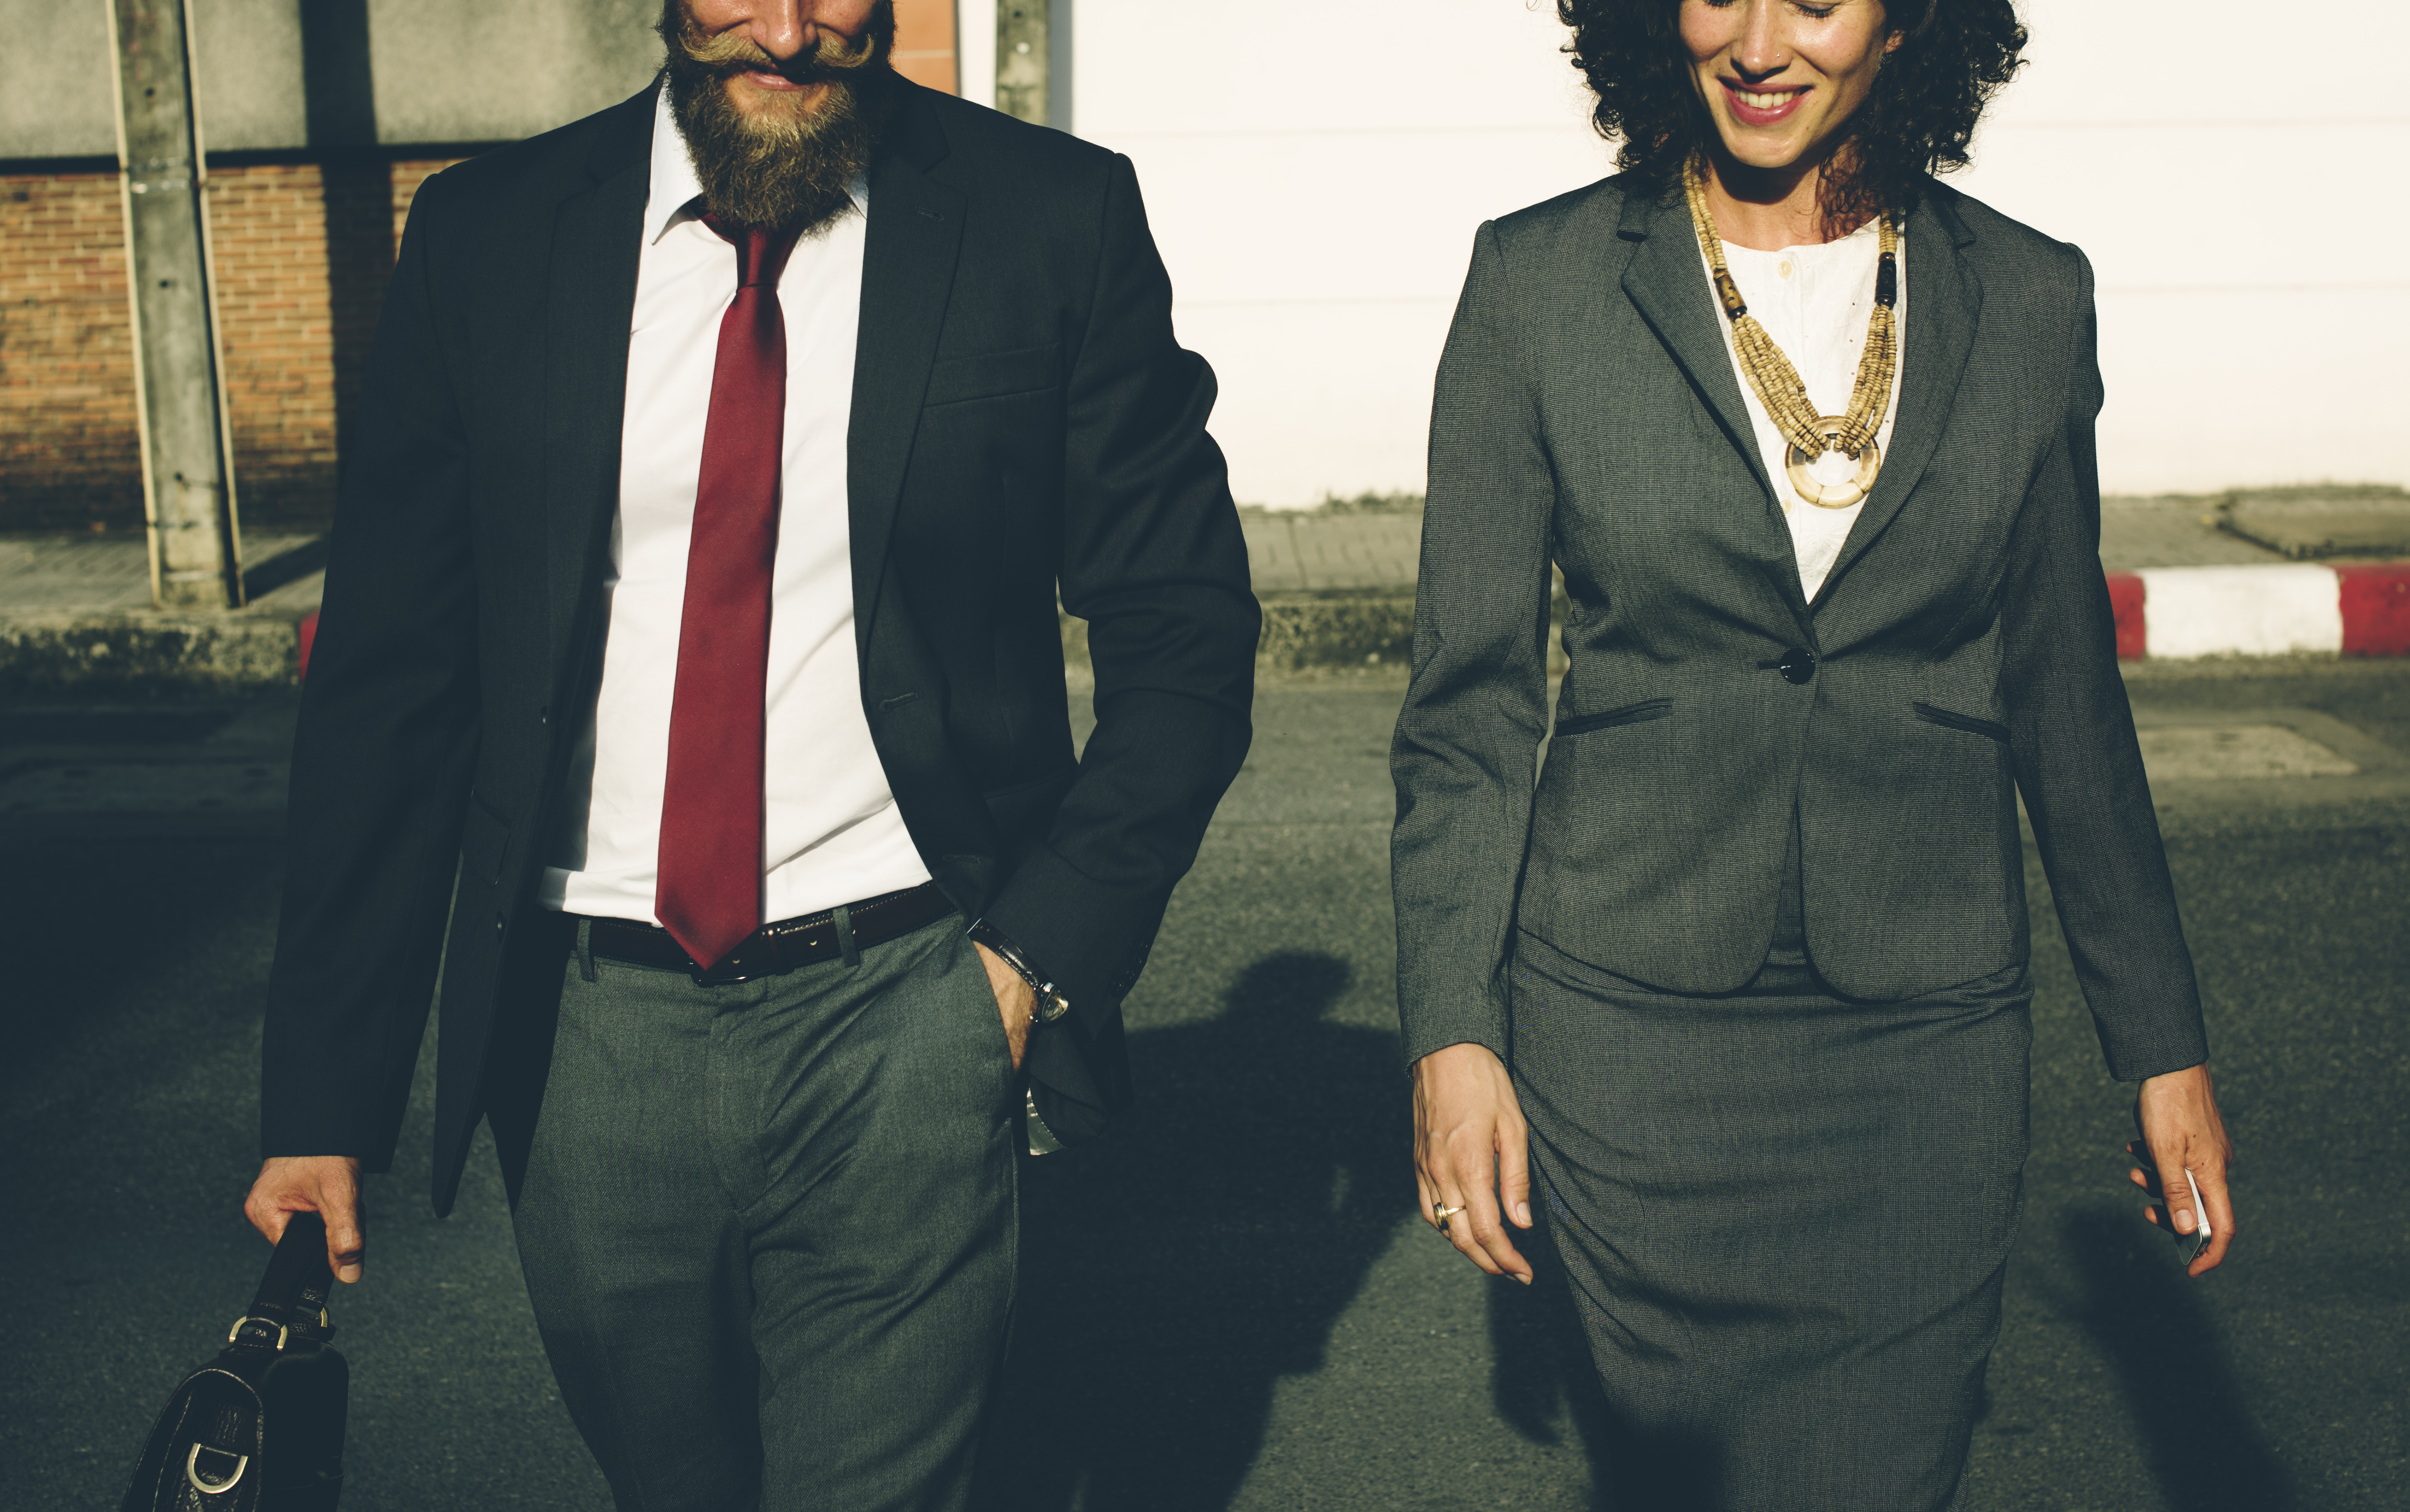 Bearded man in red tie and woman in business suit walking to work.